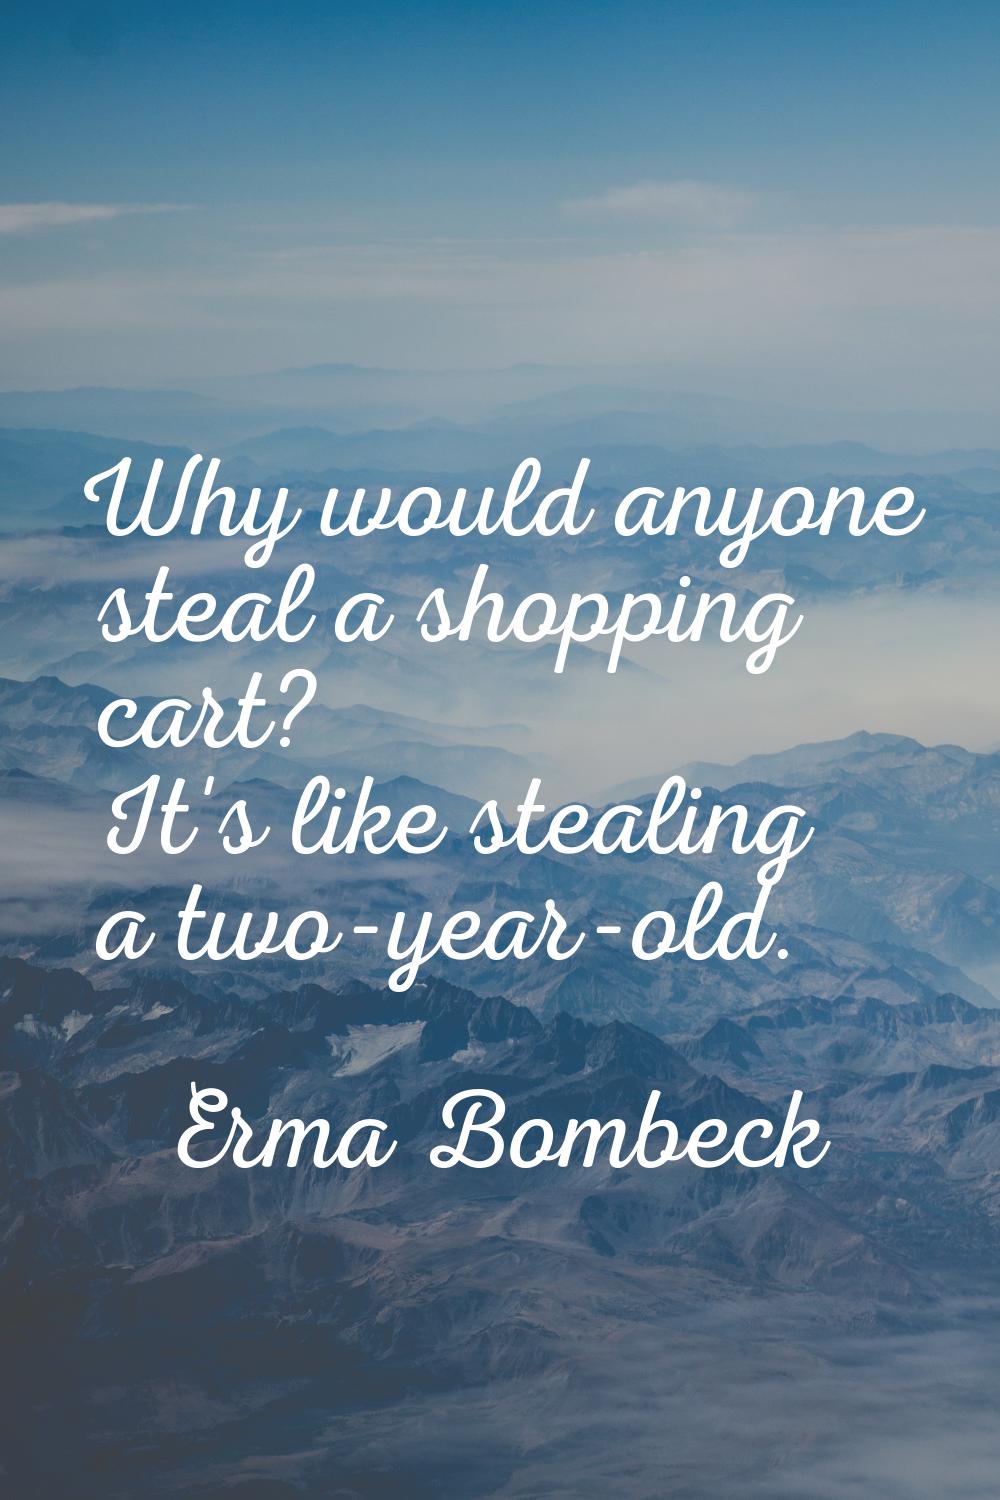 Why would anyone steal a shopping cart? It's like stealing a two-year-old.